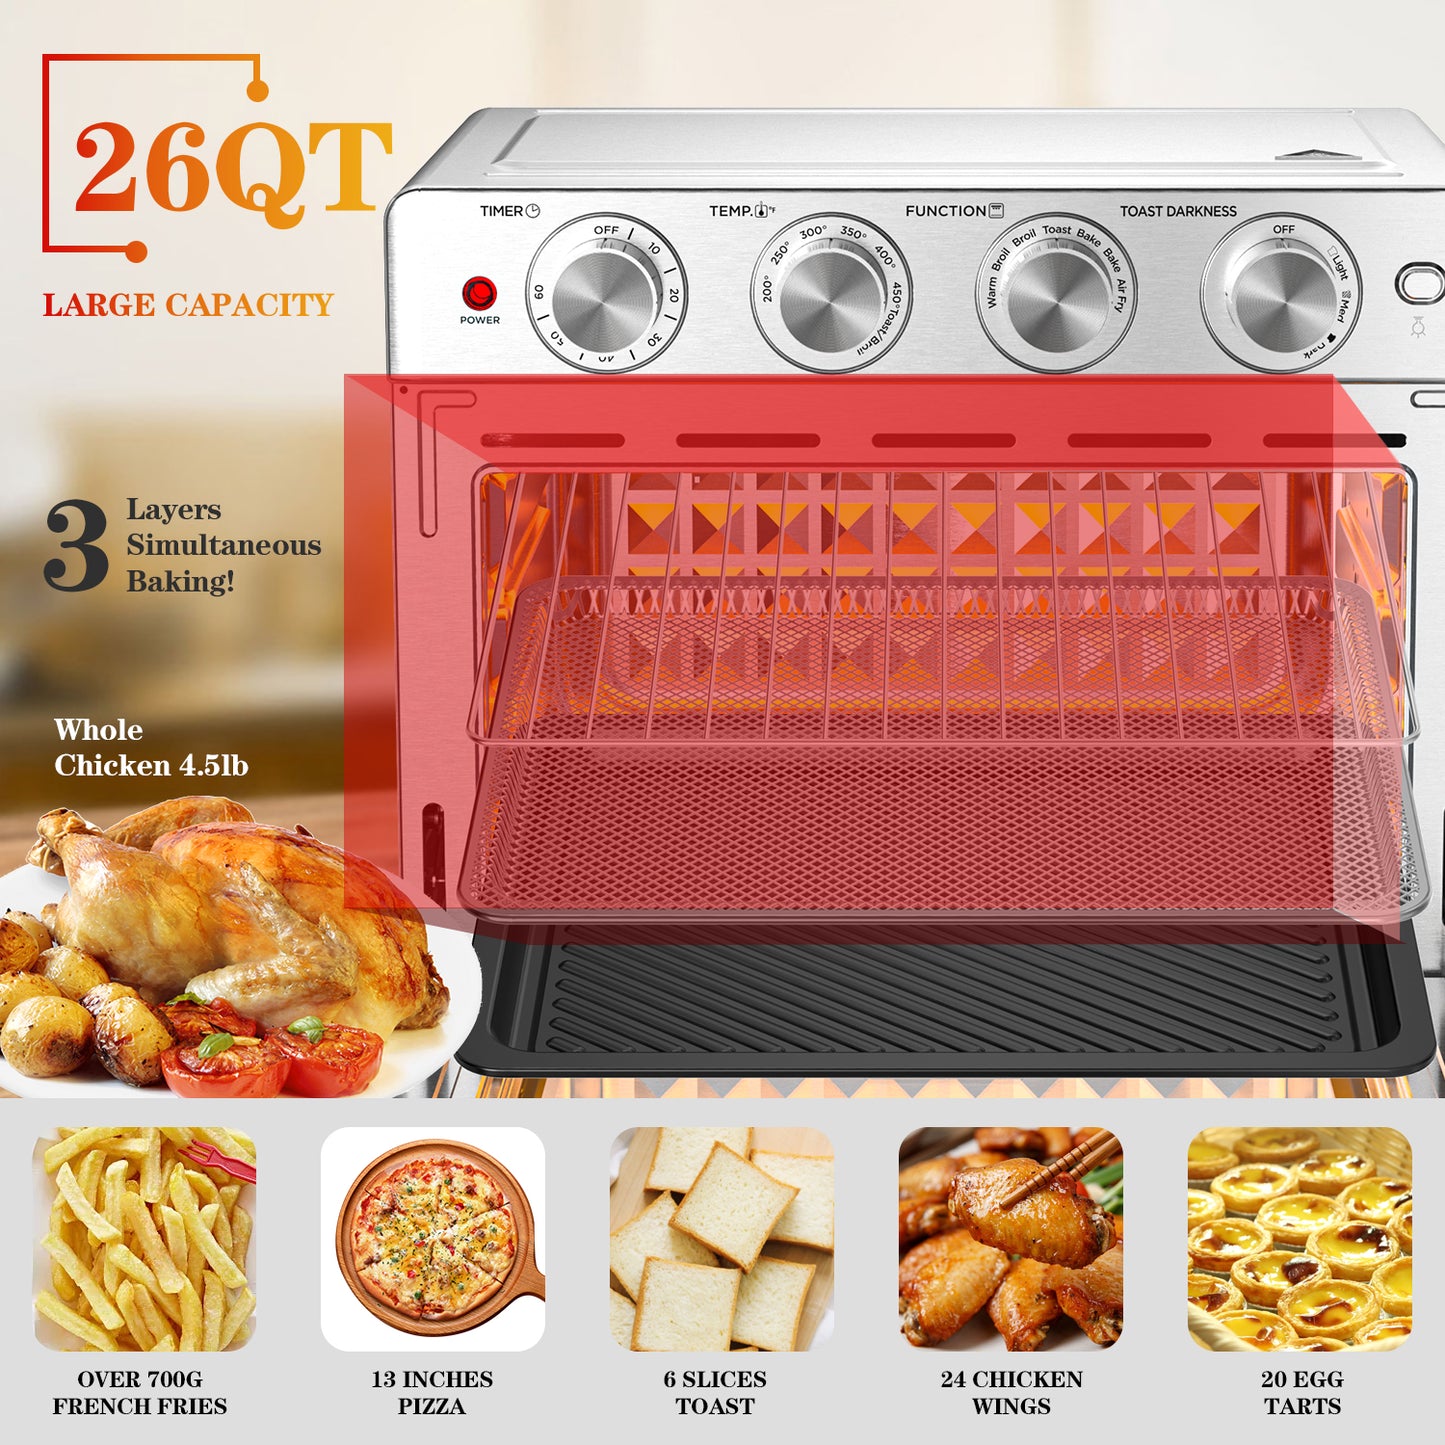 Geek Chef Air Fryer, 6 Slice 26QT/26L Air Fryer Fry Oil-Free, Extra Large Toaster Oven Combo, Air Fryer Oven, Roast, Bake, Broil, Reheat, Convection Countertop Oven, Accessories Included, Stainless St